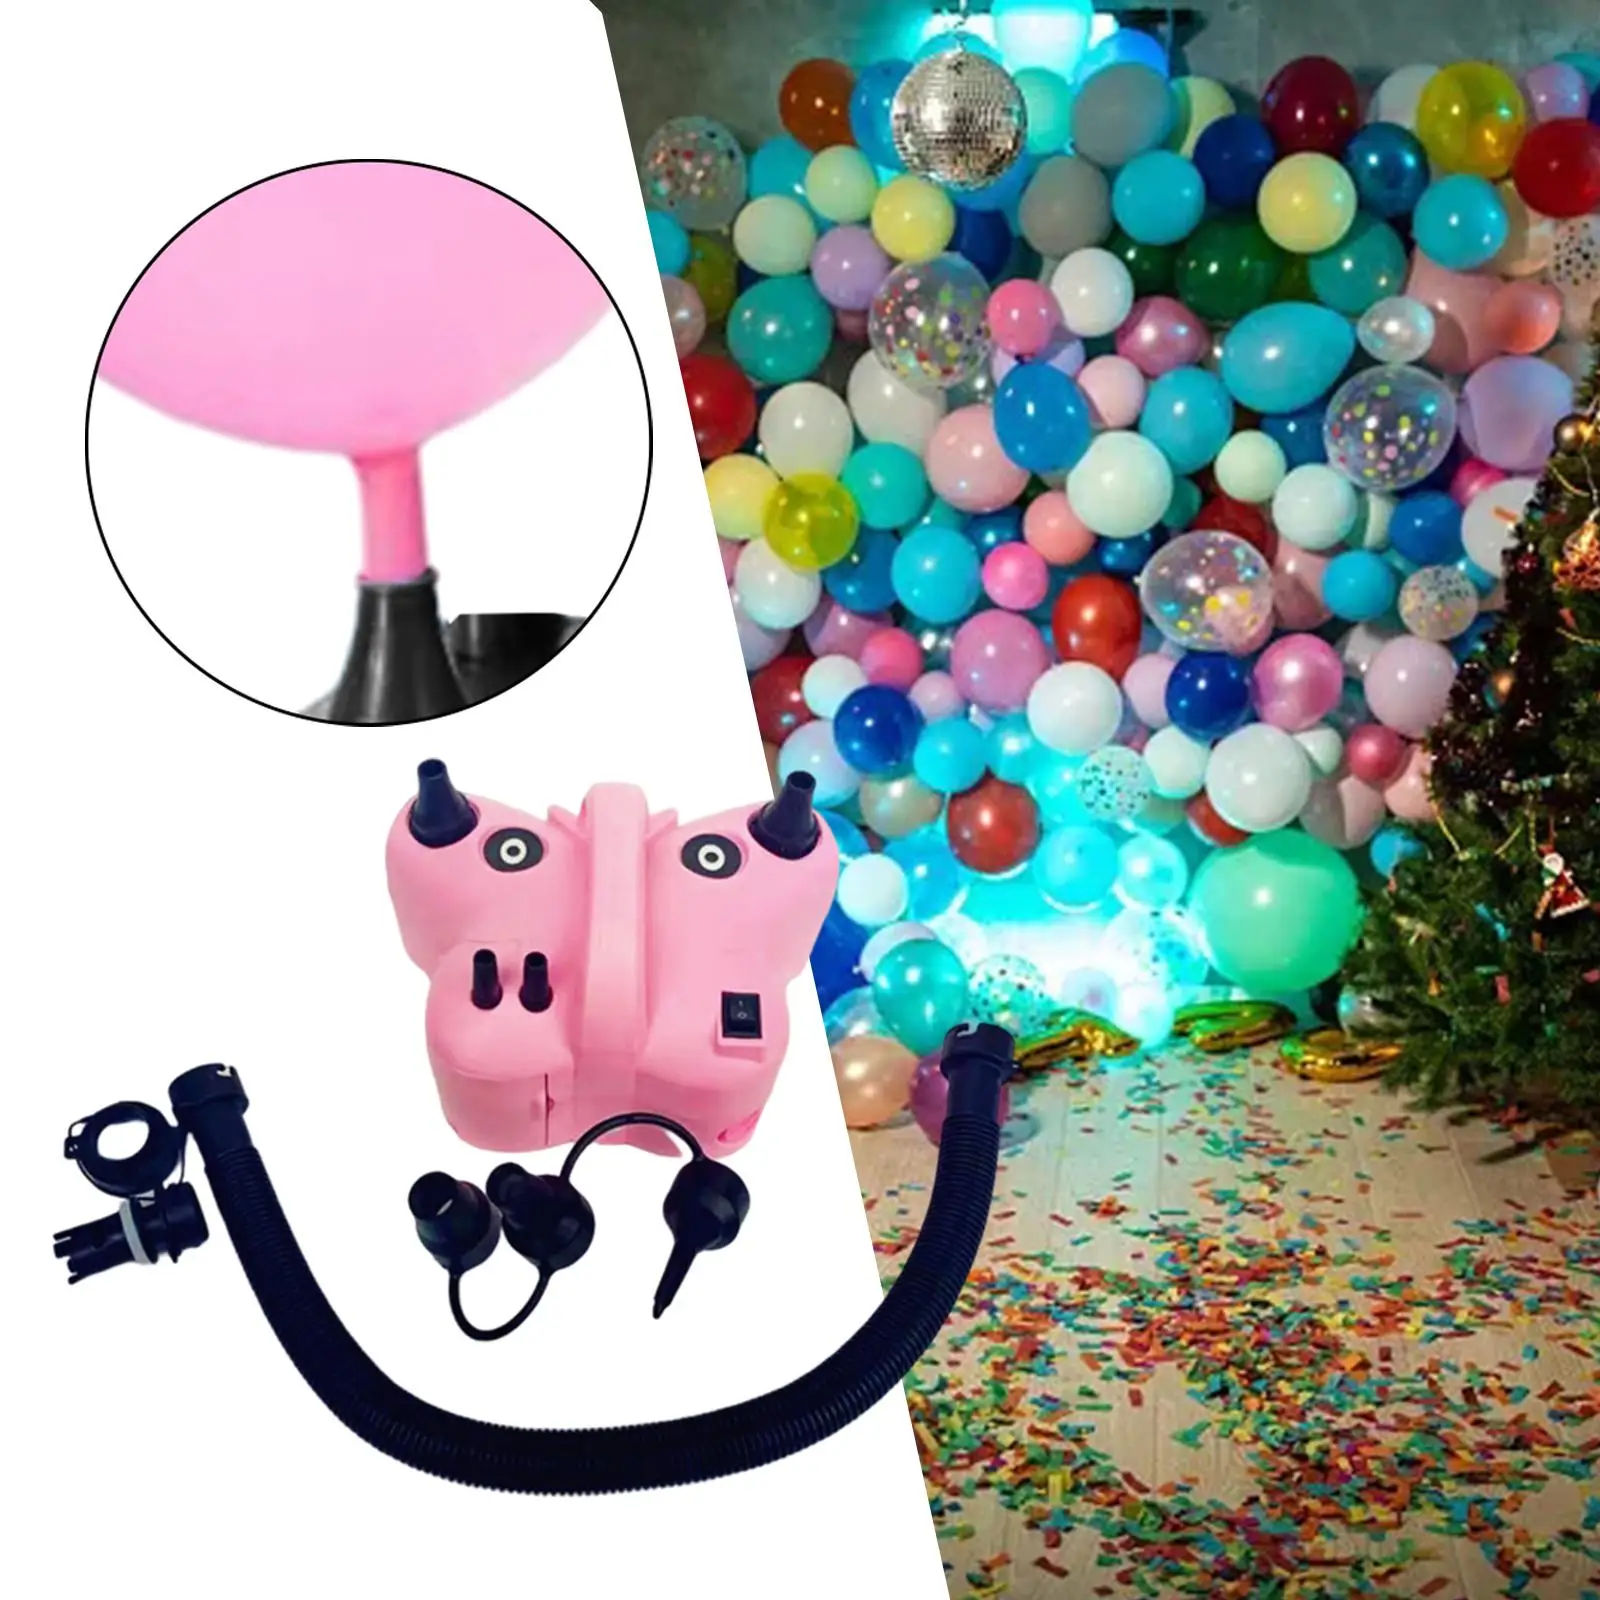 Portable Electric Balloon Inflator Pump Manual and Automatic Pumping Mode Fast and  Blower for Floating Tube Rubber Boat